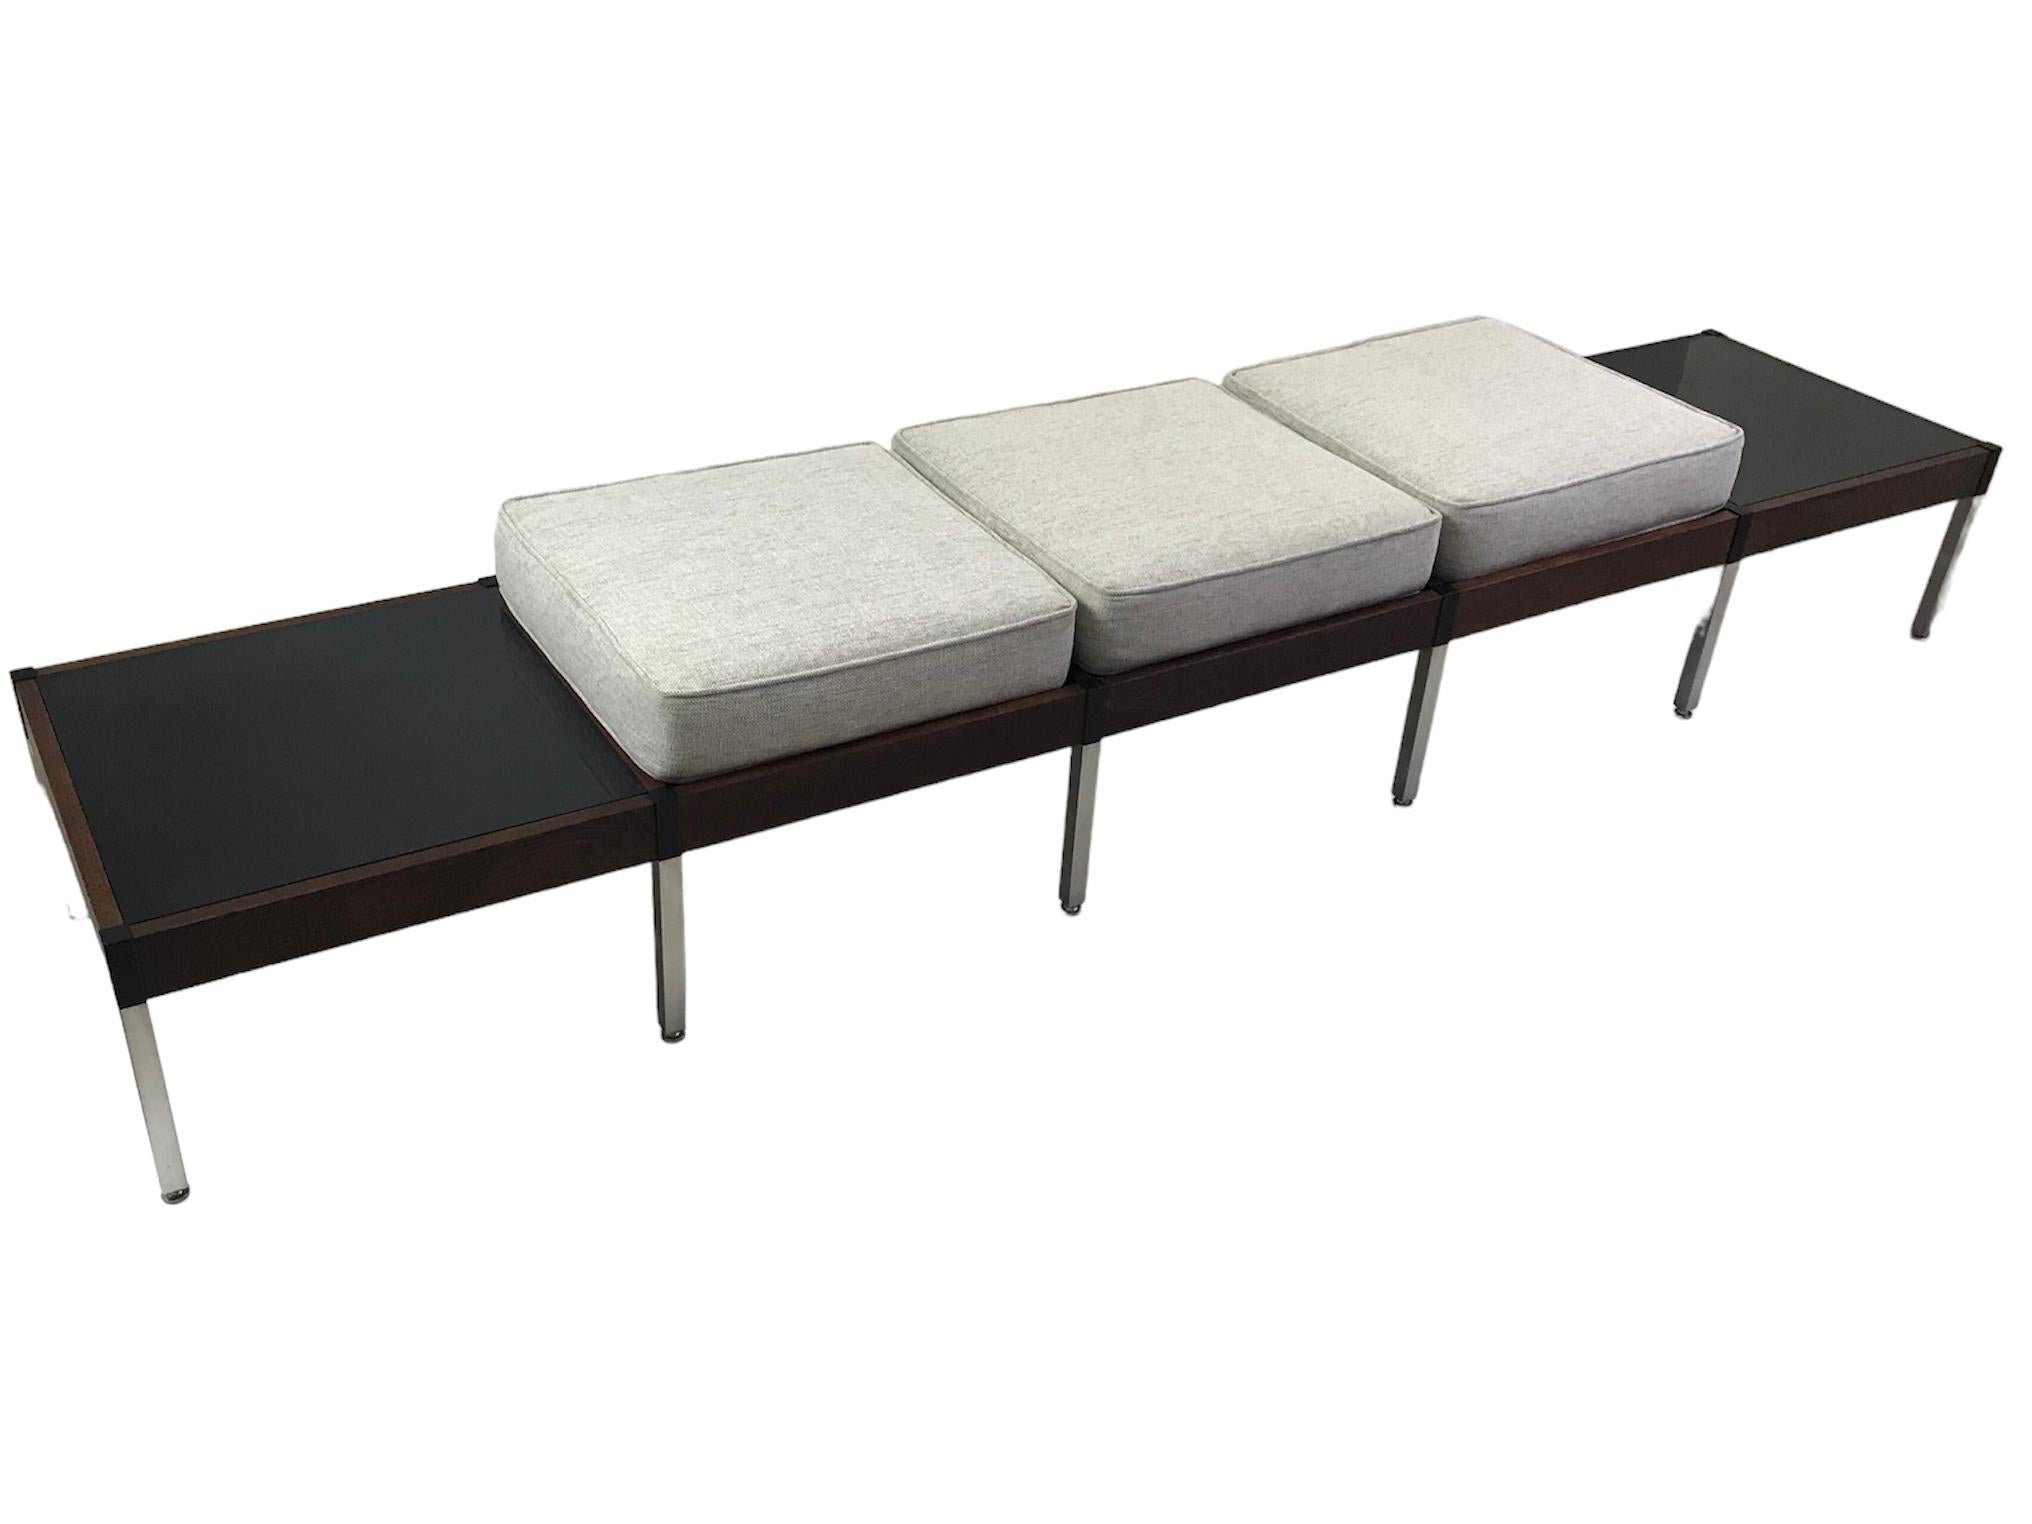 American 1960s Knoll Style Long Bench with Movable Cushions by Camilo Furniture of Miami